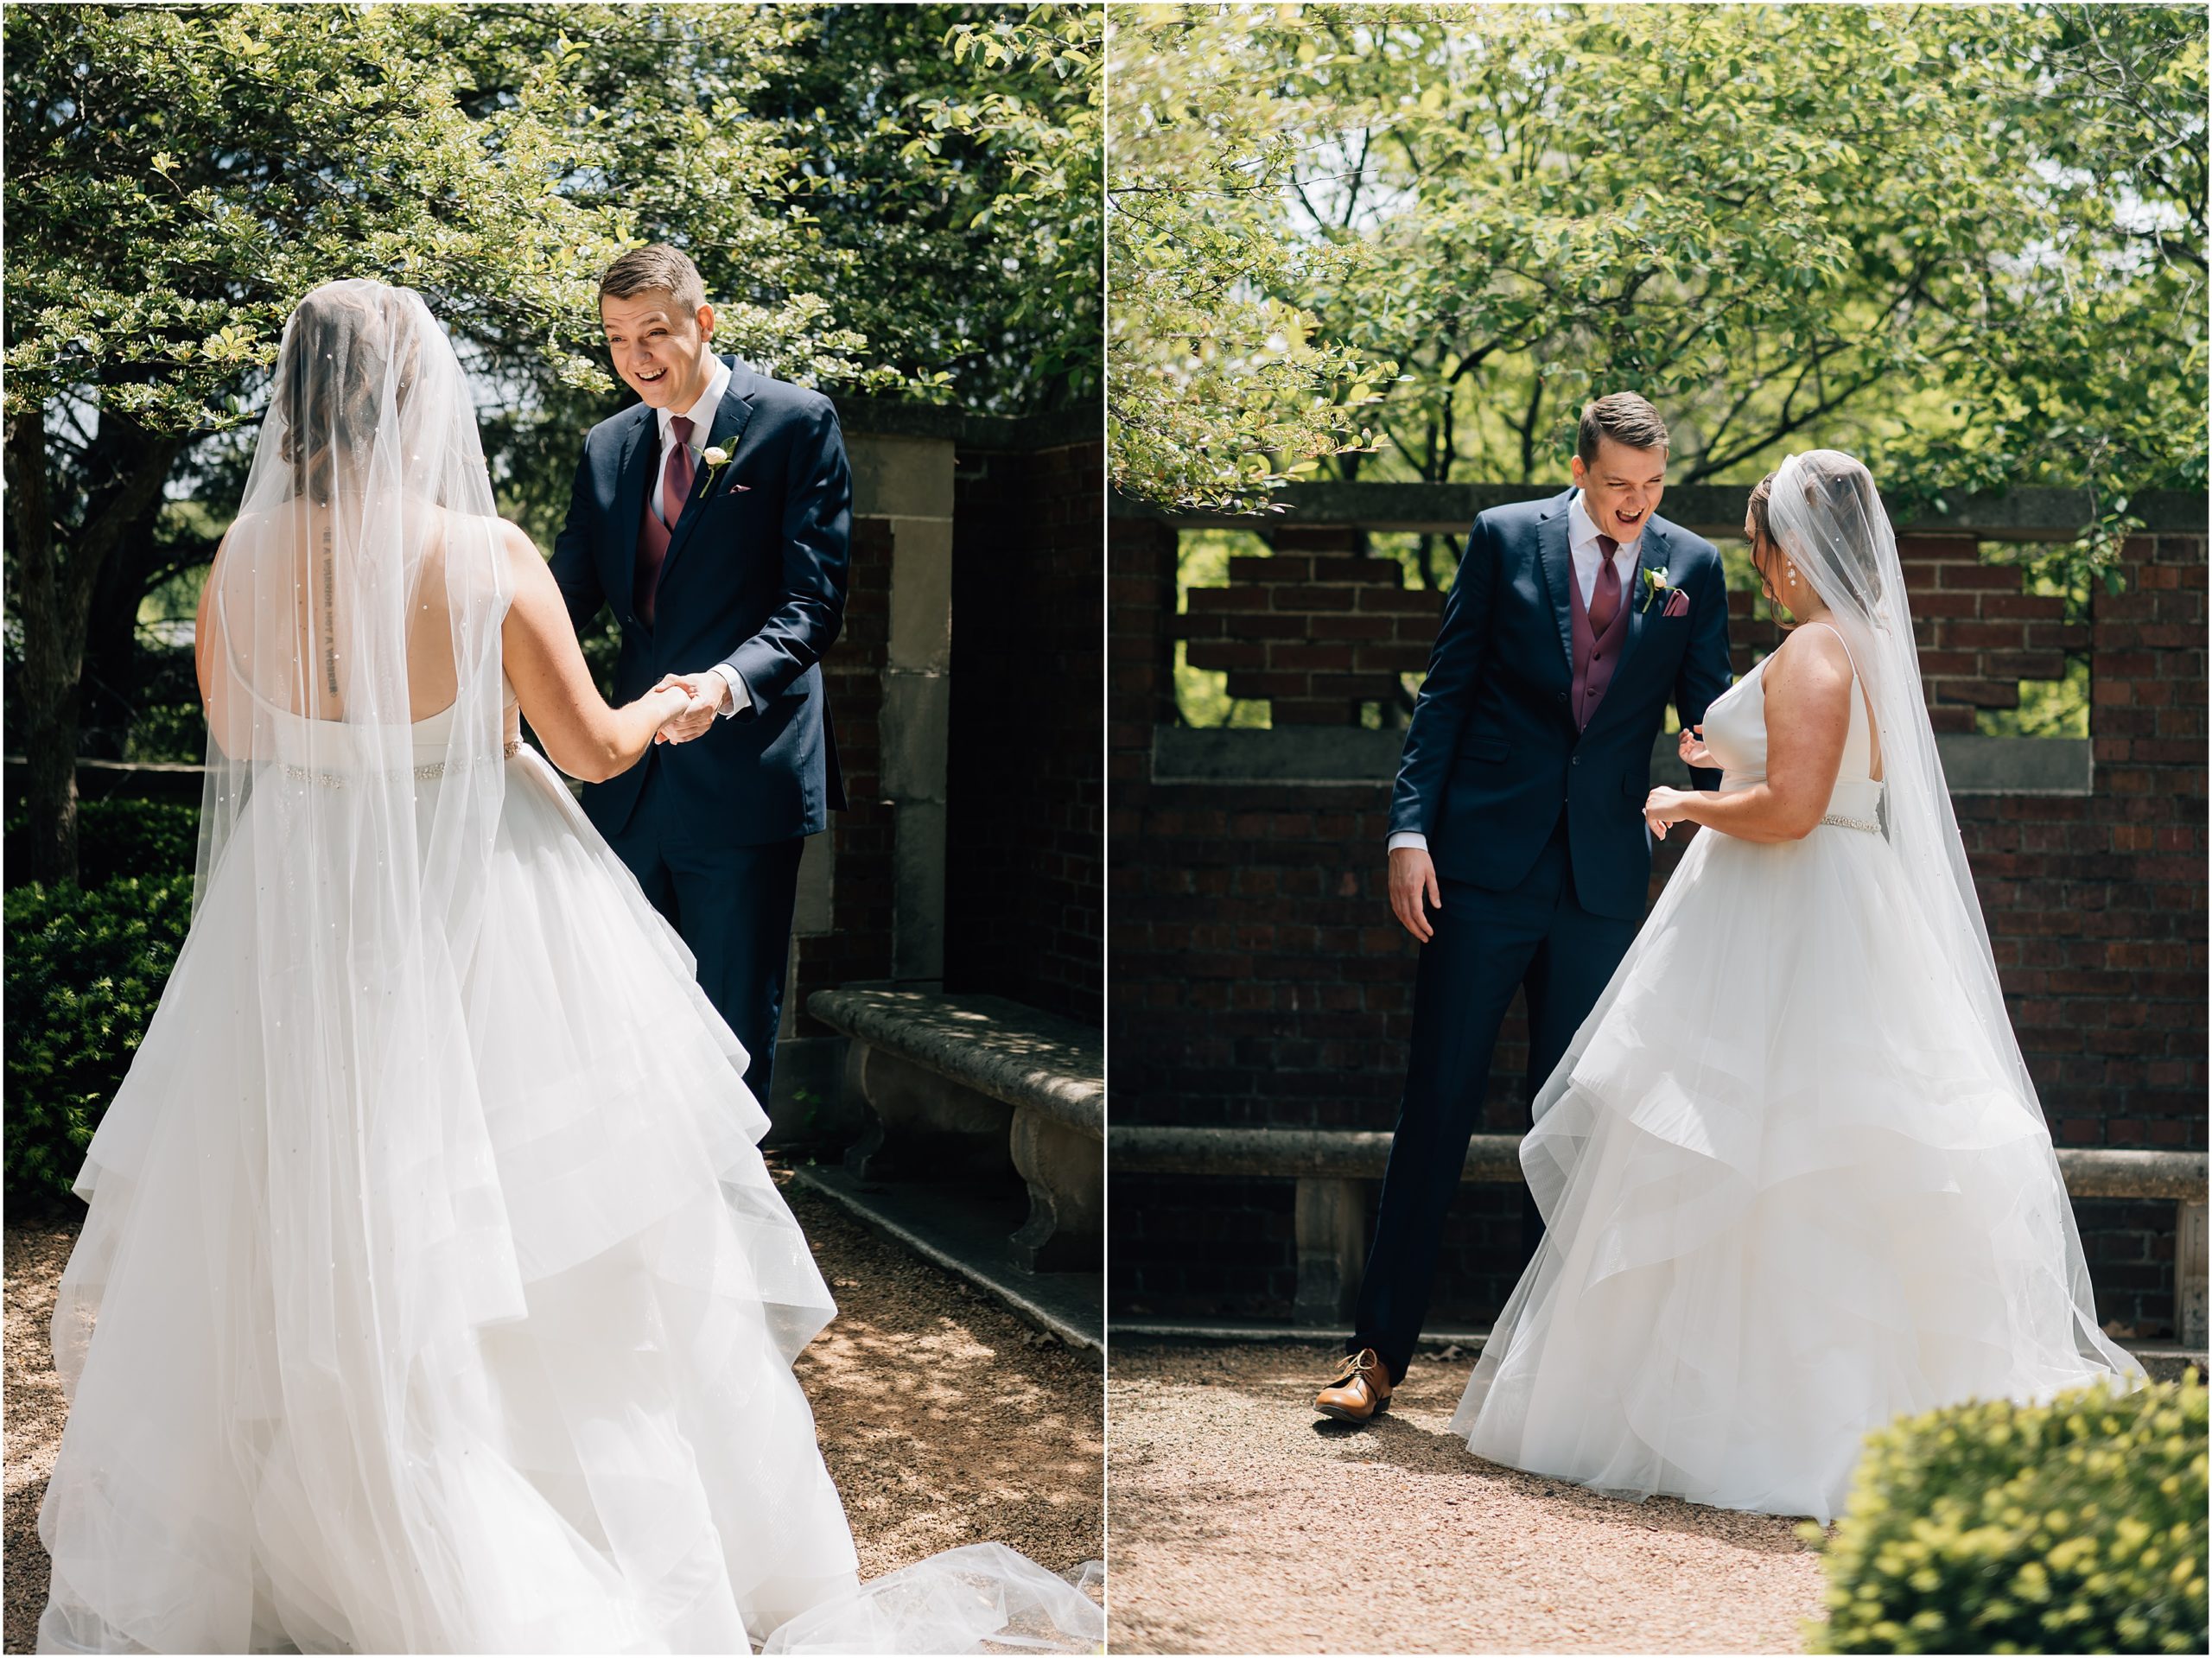 Couple shares a first look in the courtyard at Rollins Mansion. The groom is smiling at the bride and laughing. Photo by Anna Brace, who specializes in Omaha wedding photography.